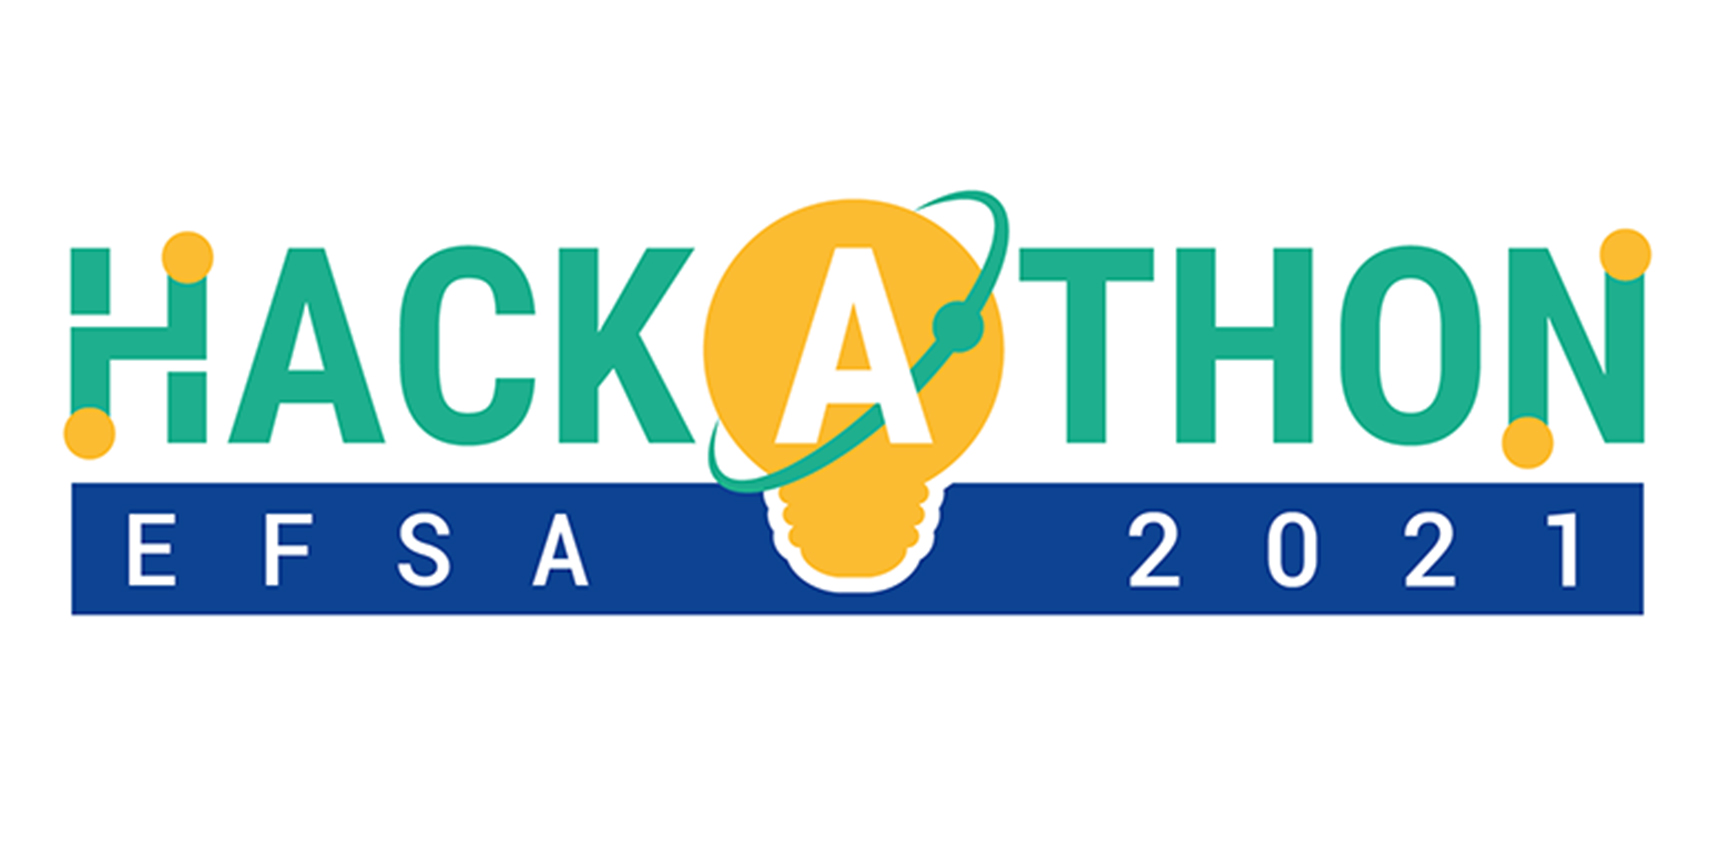 Hackathon launched by the European Food Safety Authority (EFSA) and EIT Alumni